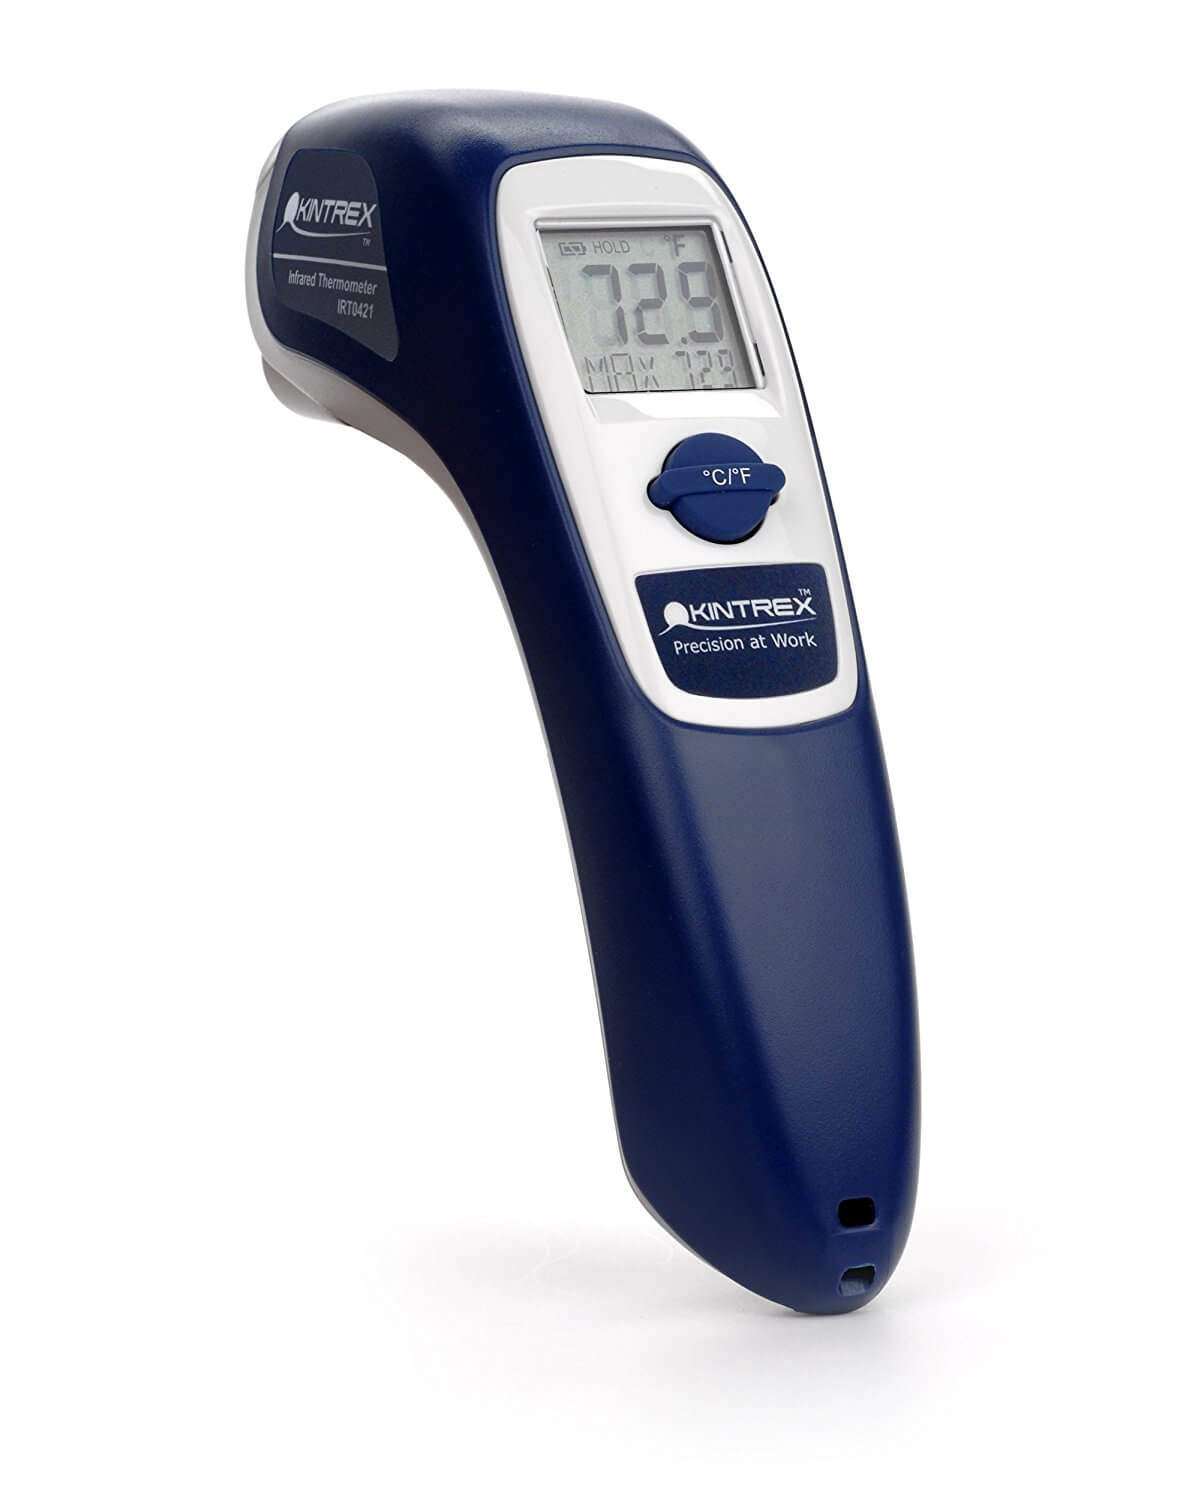 Kintrex IRT0421 Non-Contact Infrared Thermometer